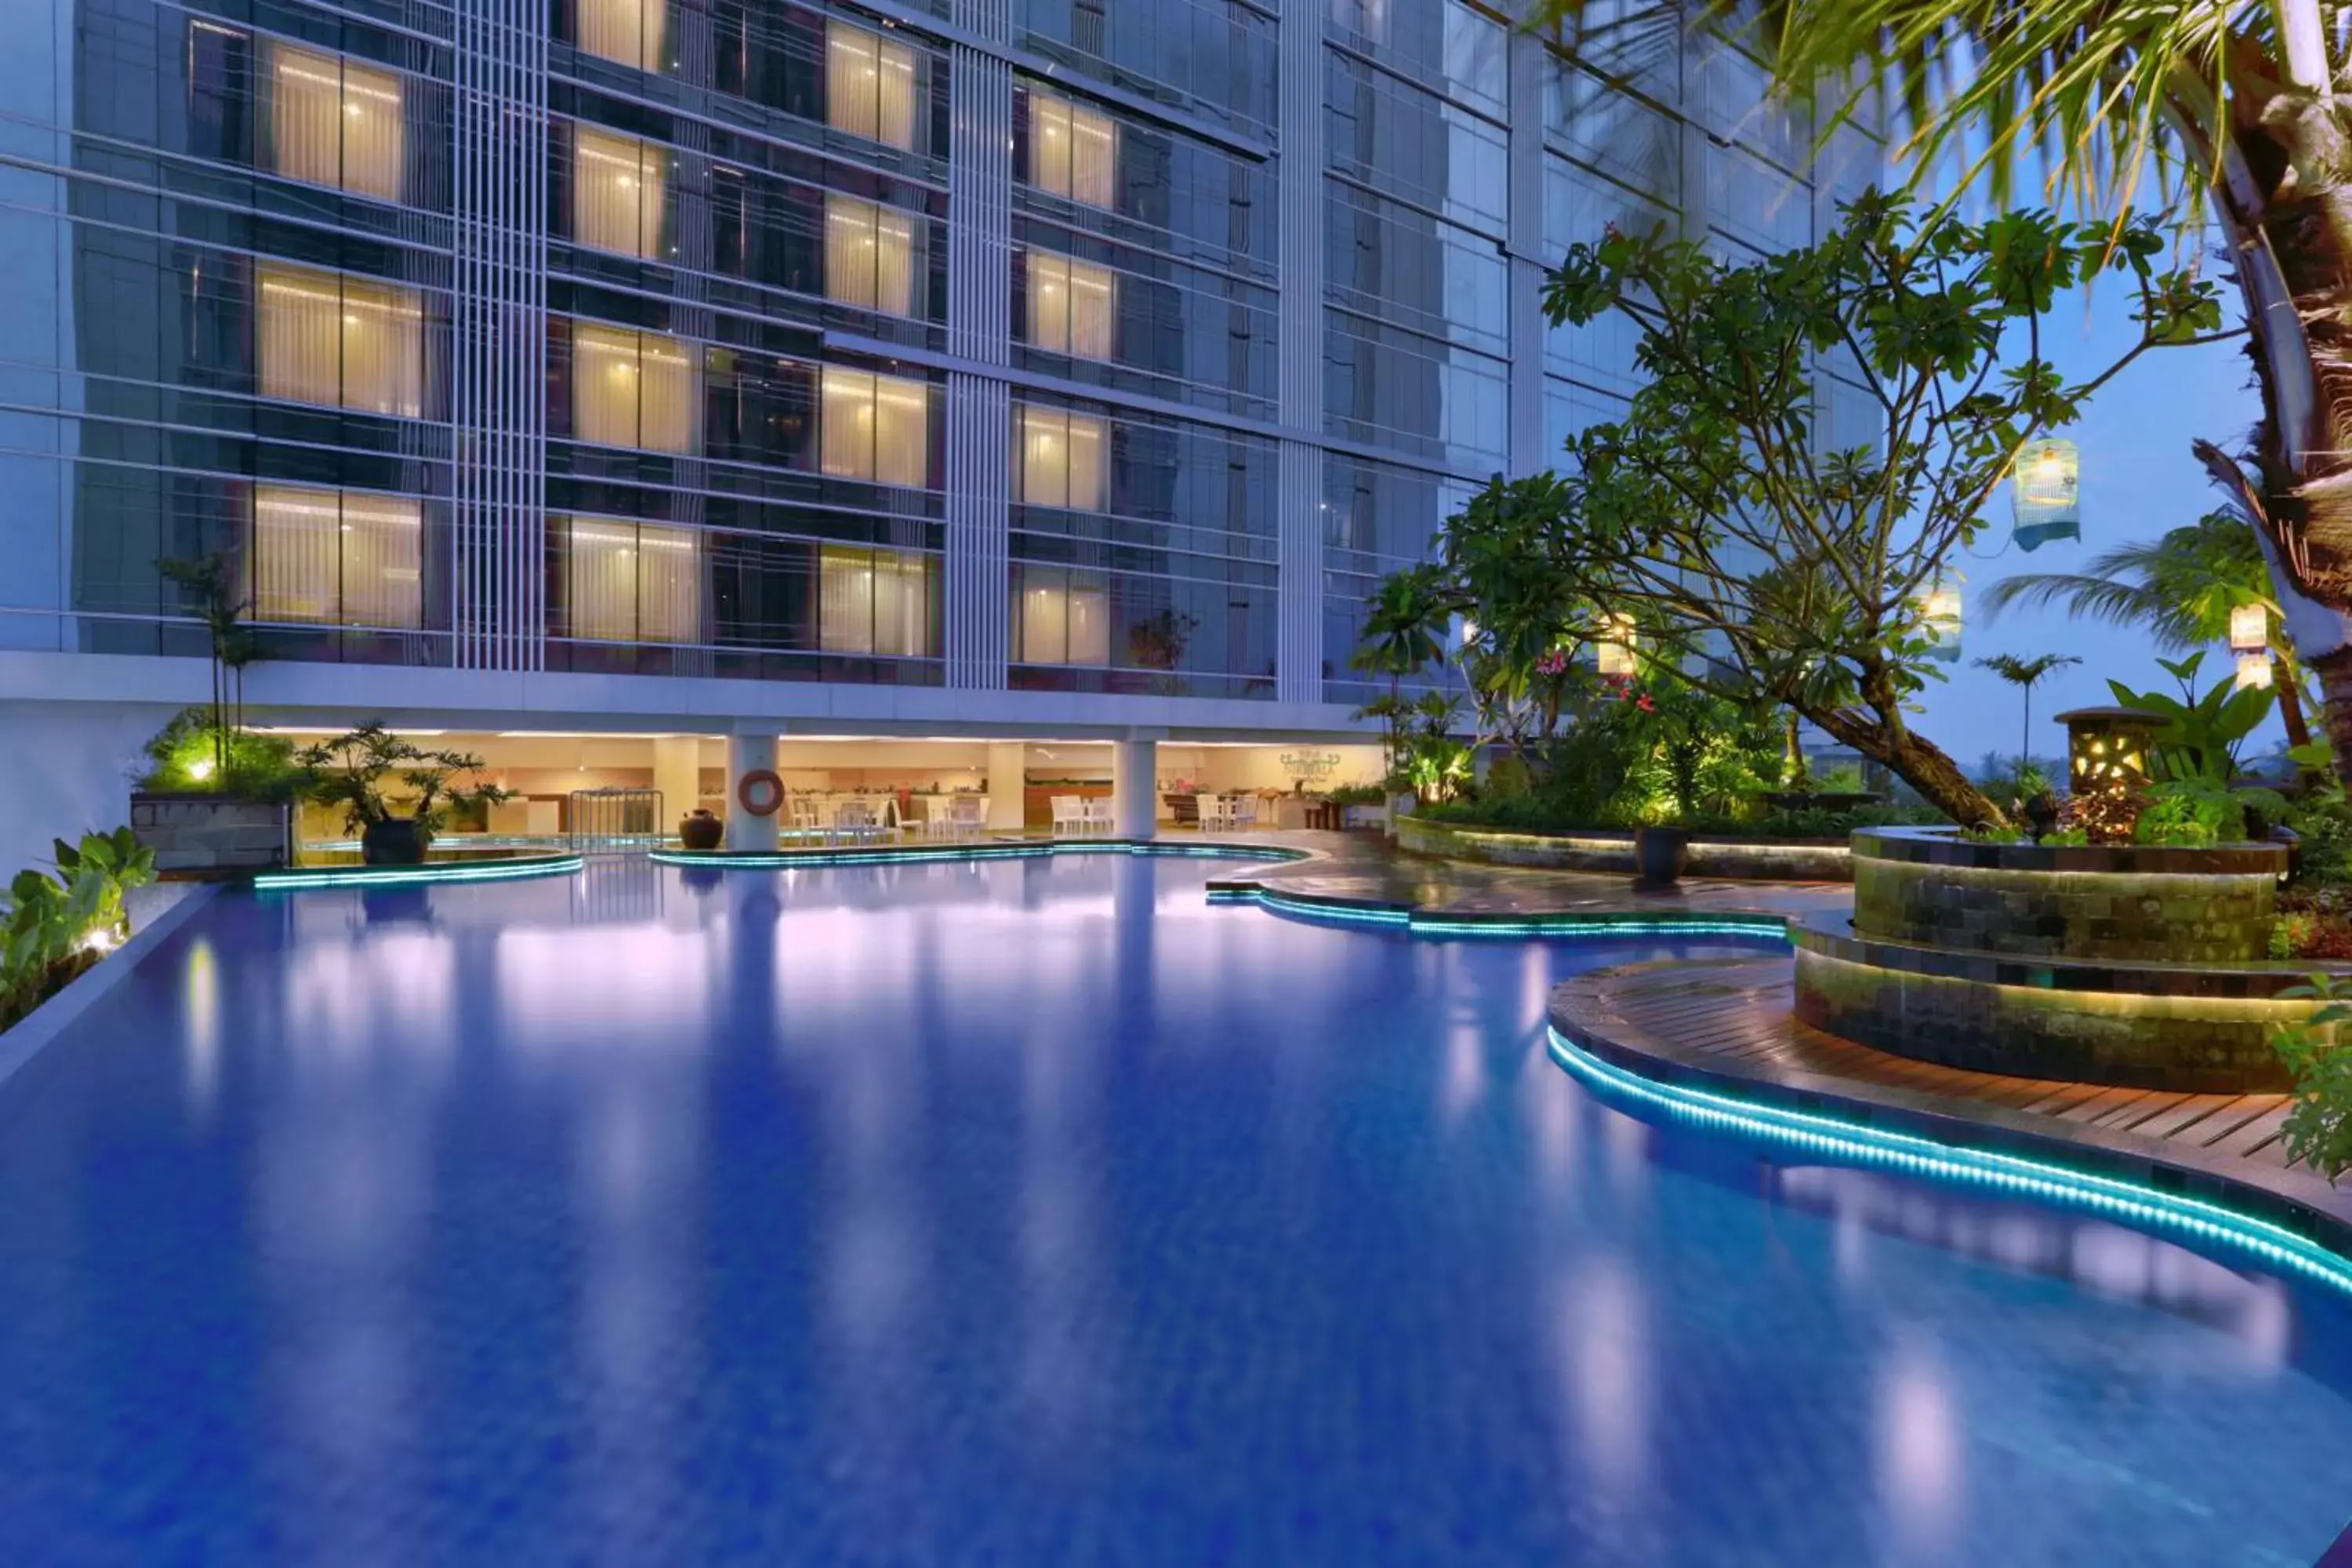 Property building, Swimming Pool in The Alana Yogyakarta Hotel and Convention Center